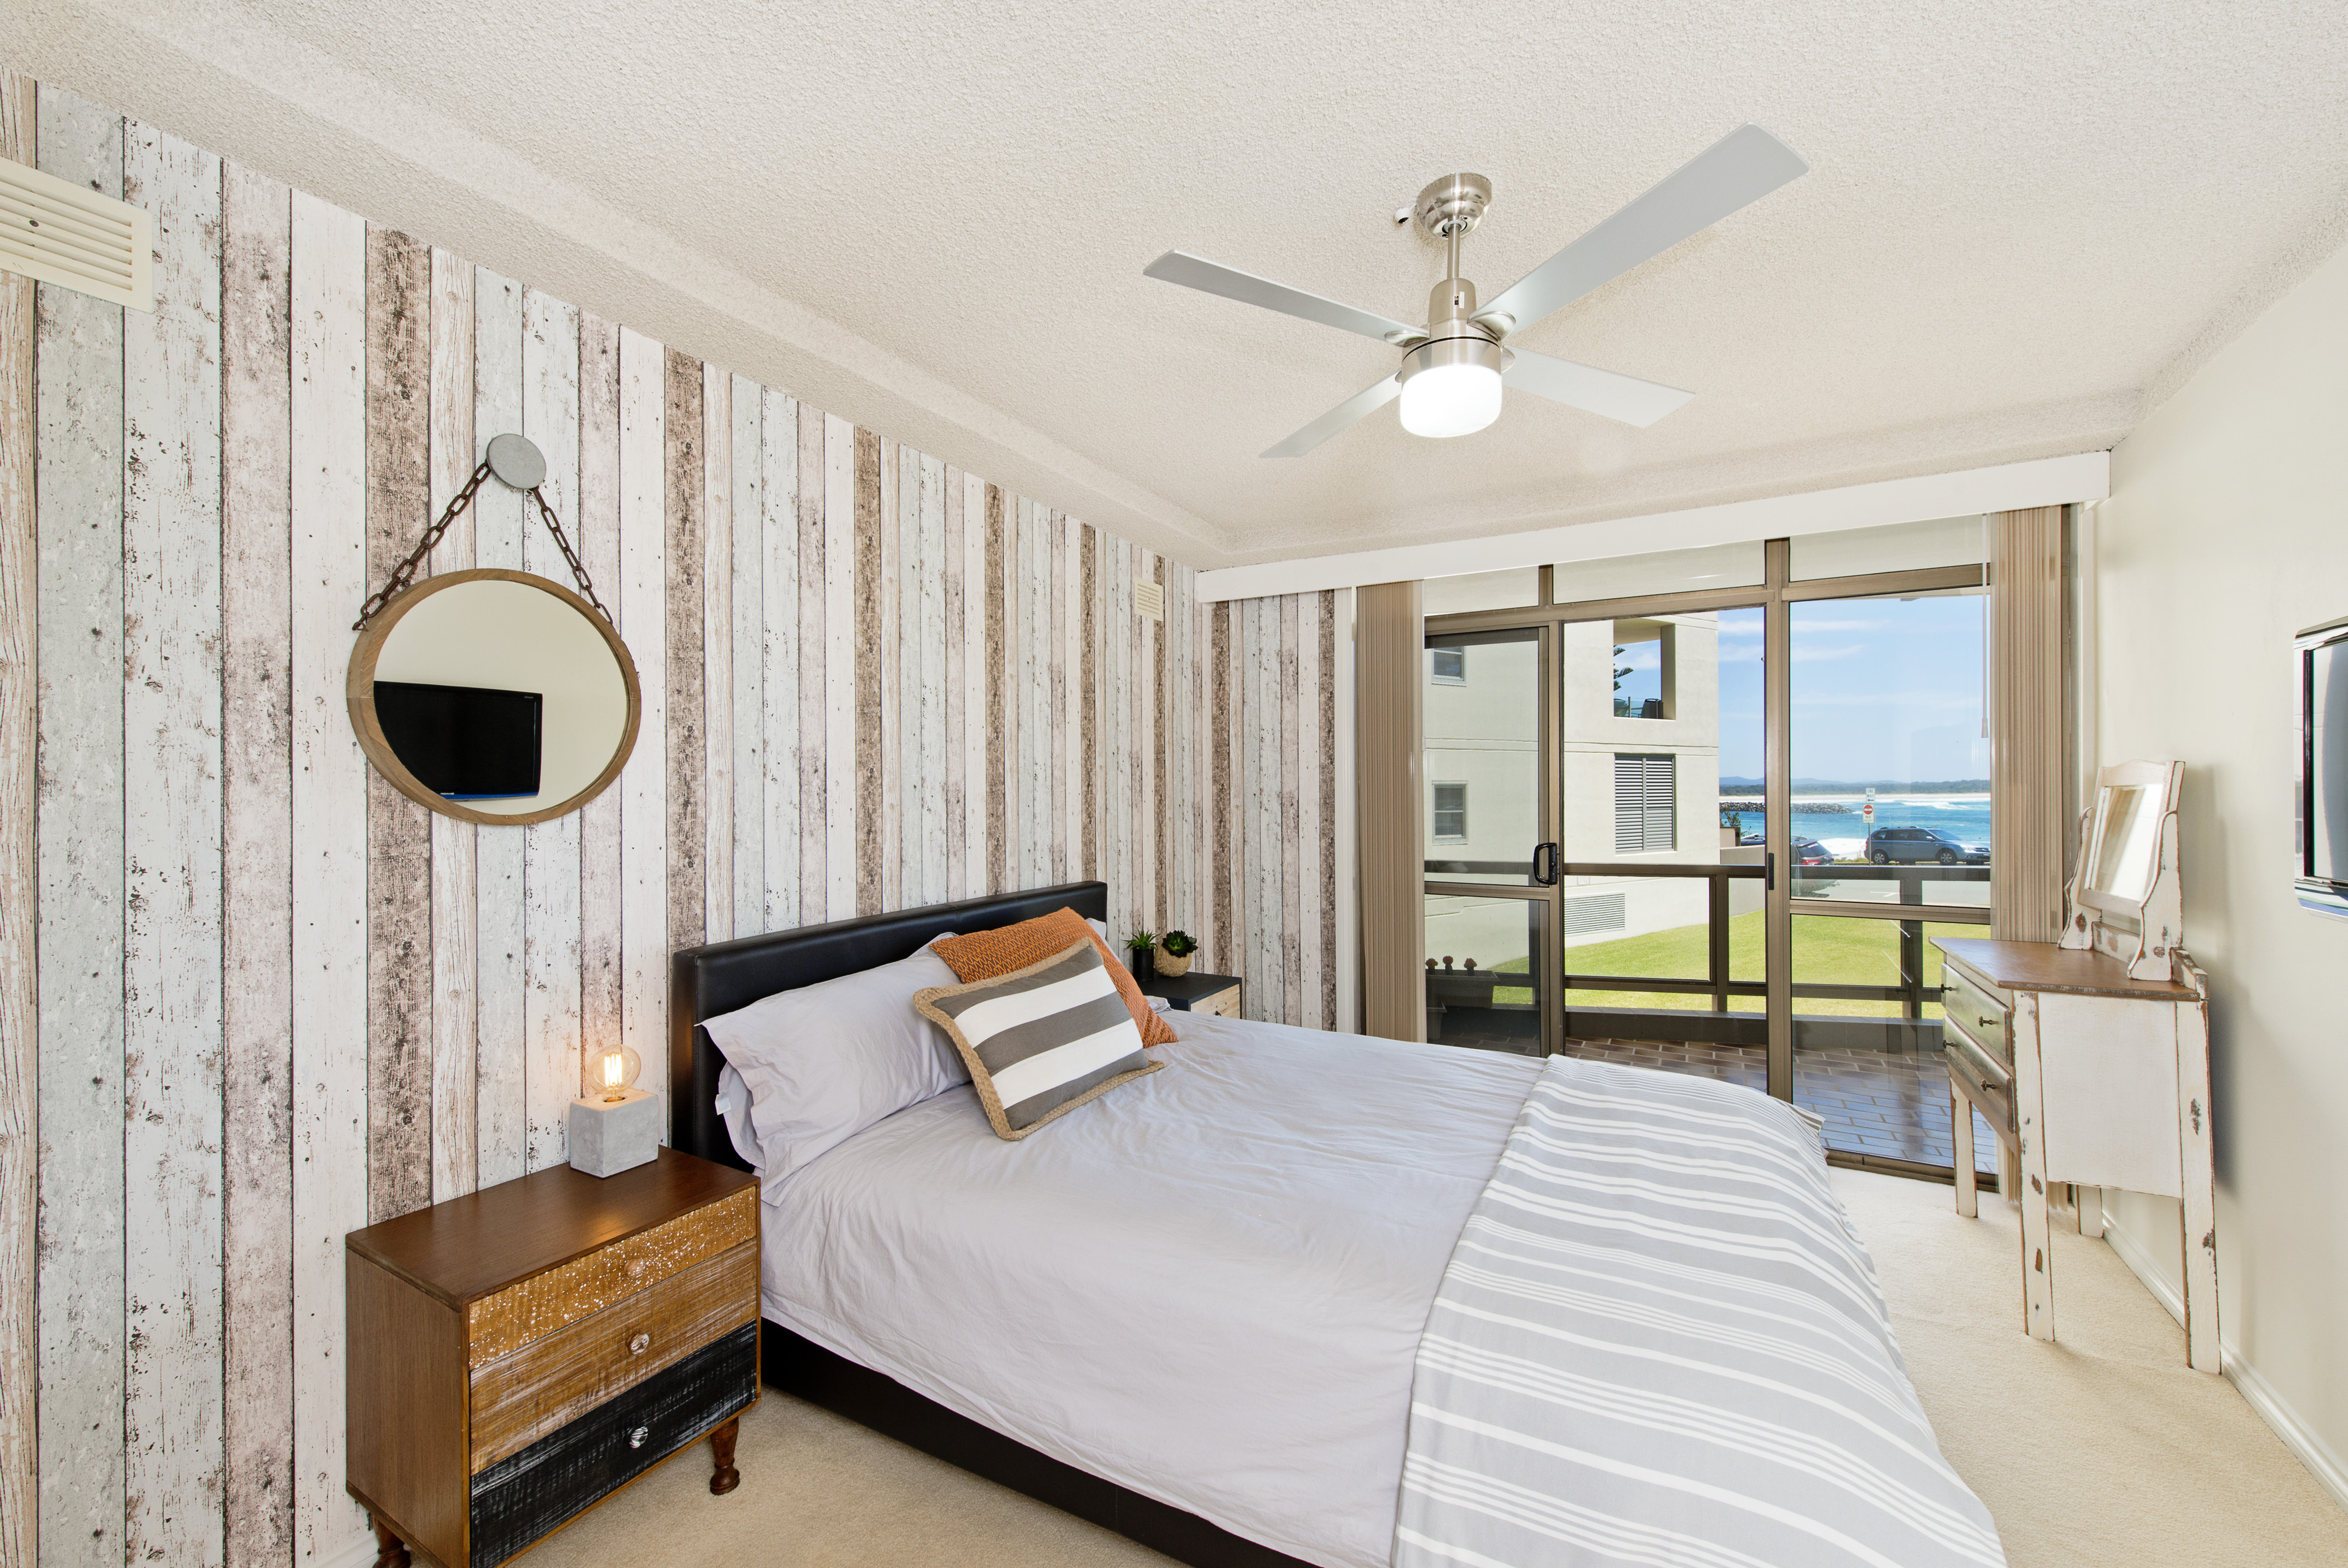 Second bedroom with queen bed, ocean views, TV and ceiling fan. Beauty at the Beach